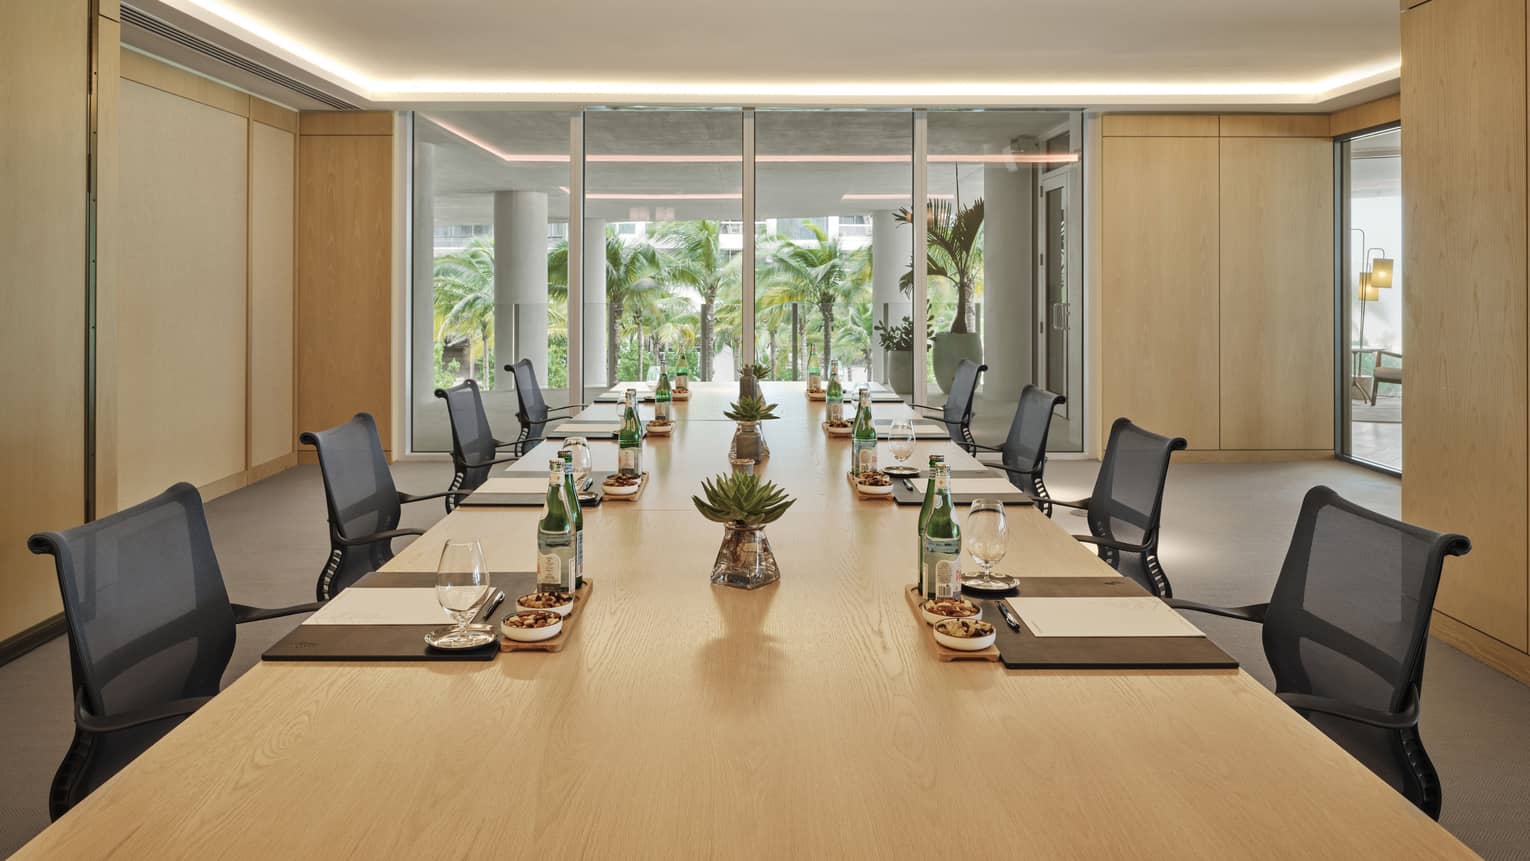 A meeting room with a long wooden table, black chairs and a large window.